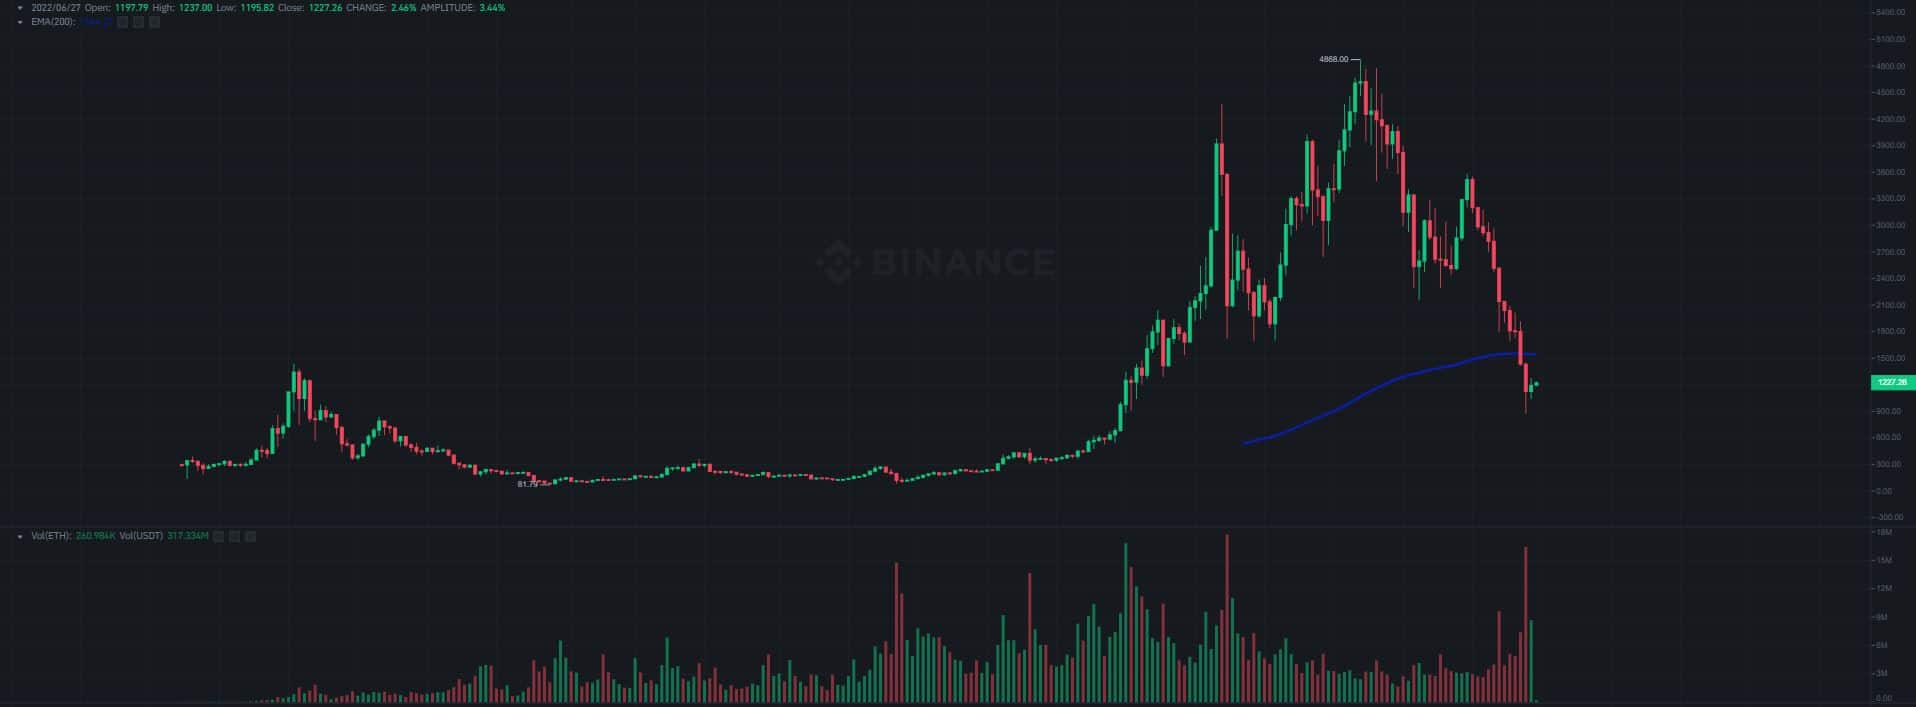 Signs of Recovery? Ethereum Ends Longest Ever Streak of 11 Red Weekly Candles